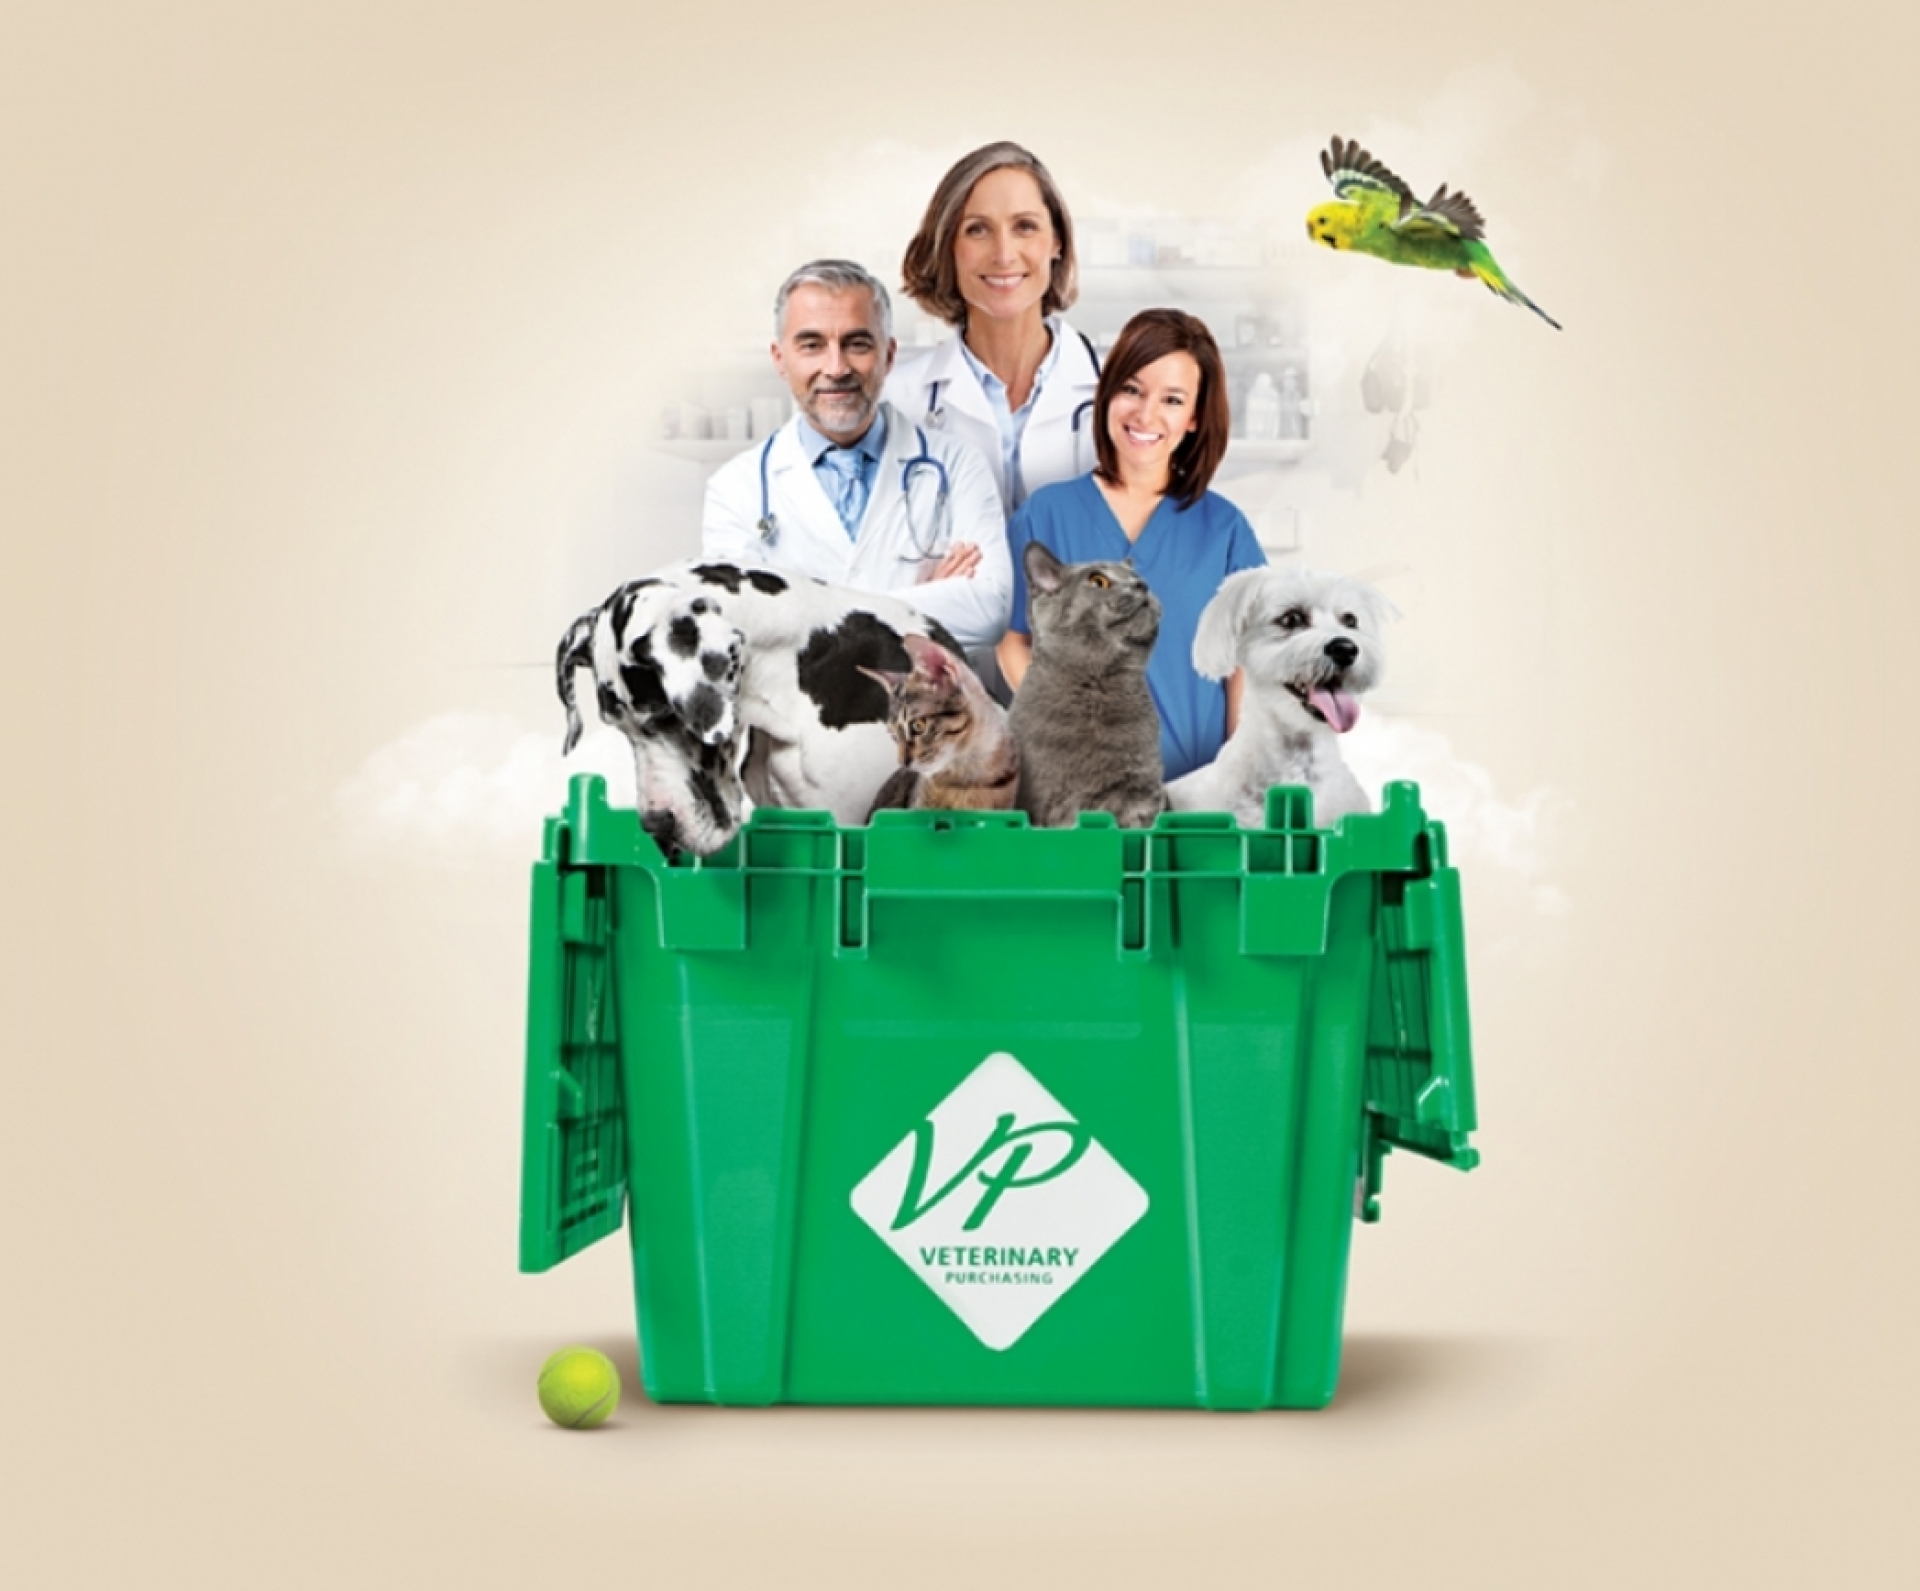 A Veterinary Purchasing crate that has veterinary doctors and pets inside